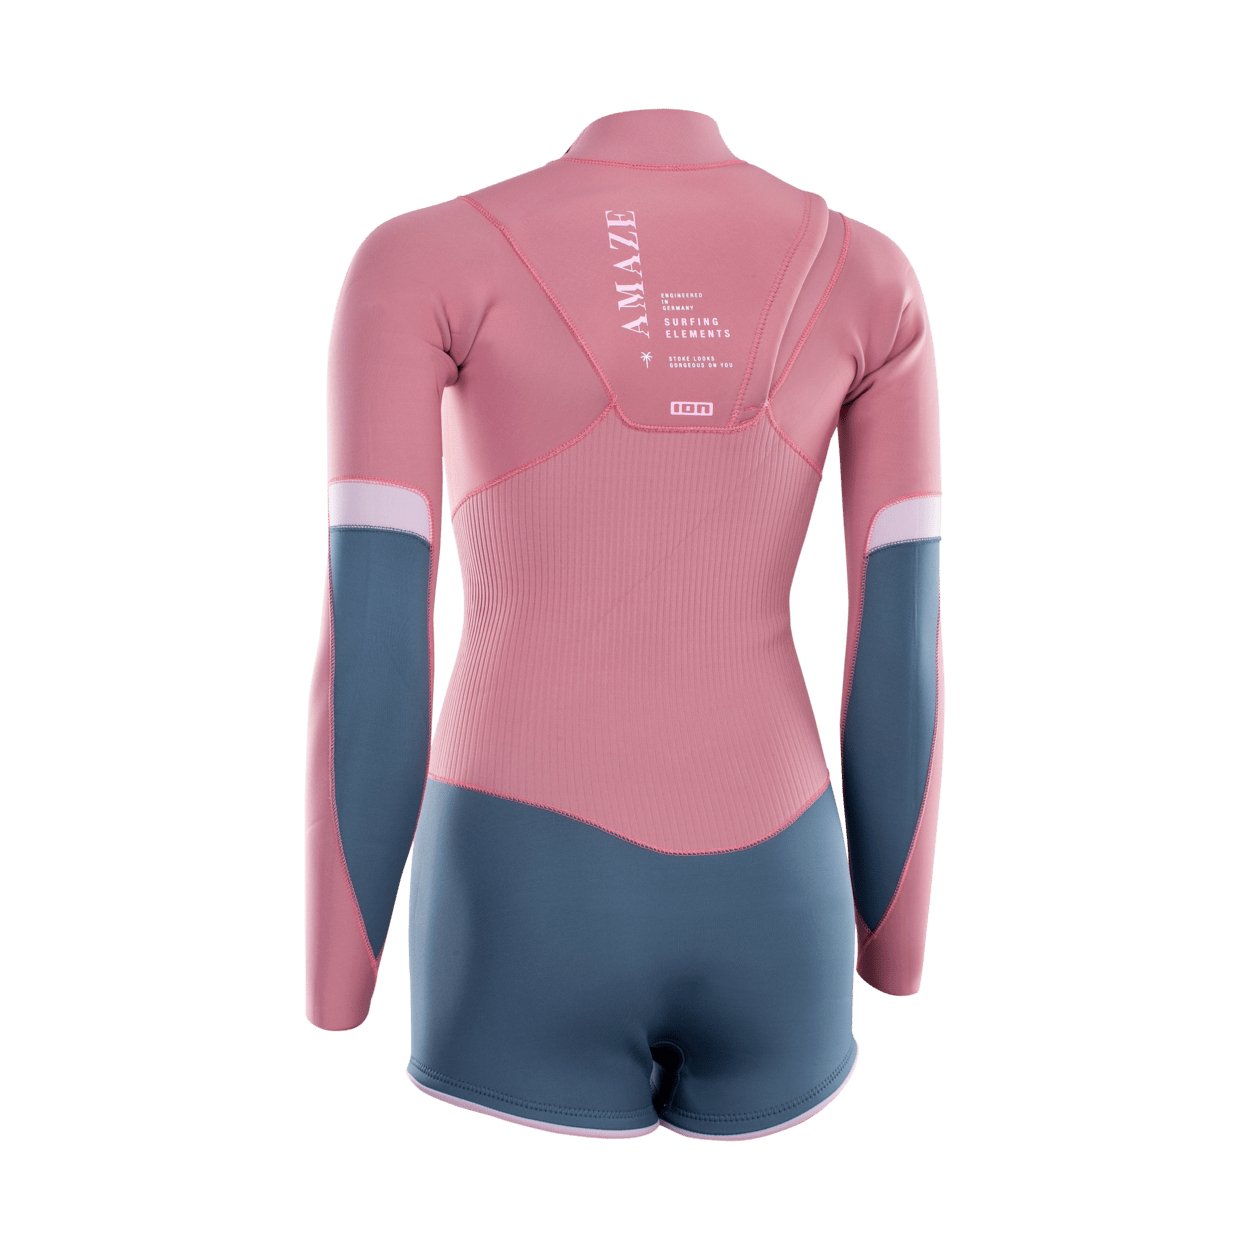 ION Amaze Shorty LS 2.0 NZ DL 2021 - Worthing Watersports - 9008415953622 - Wetsuits - ION Water